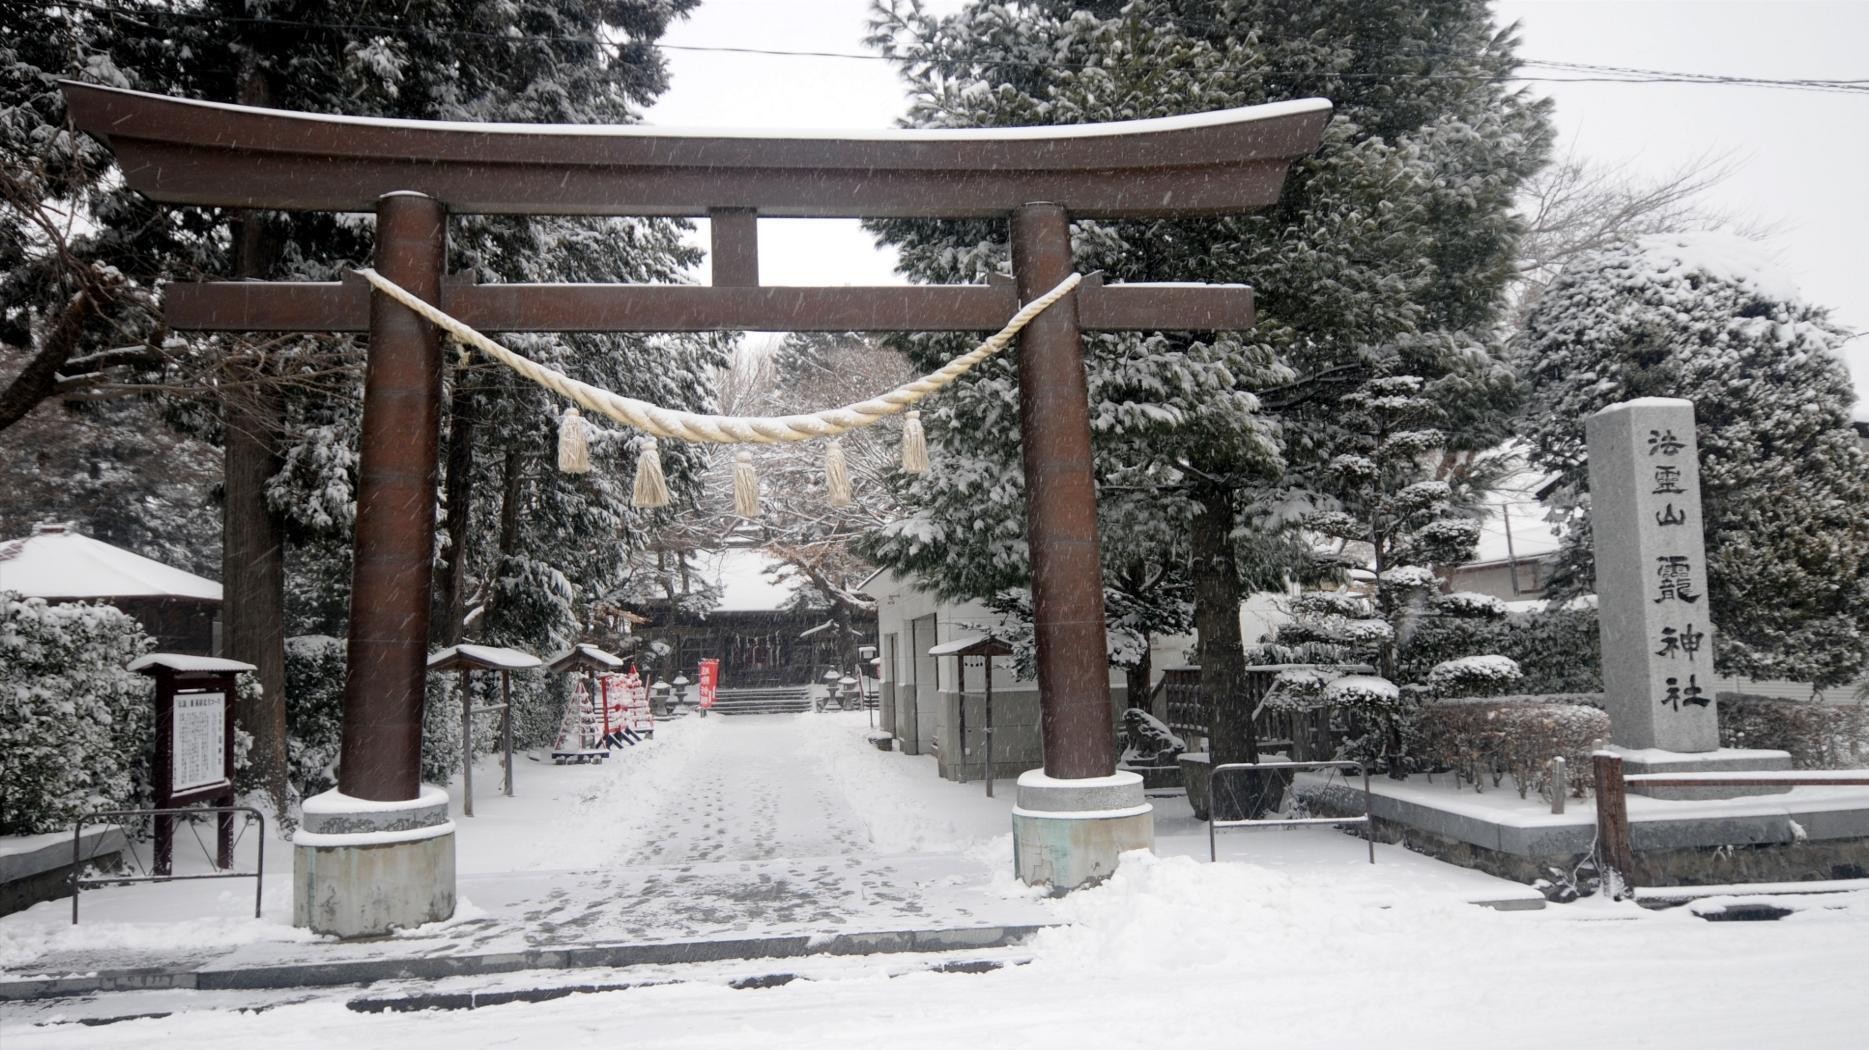 General 1869x1050 winter shrine Japan snow Asia outdoors temple